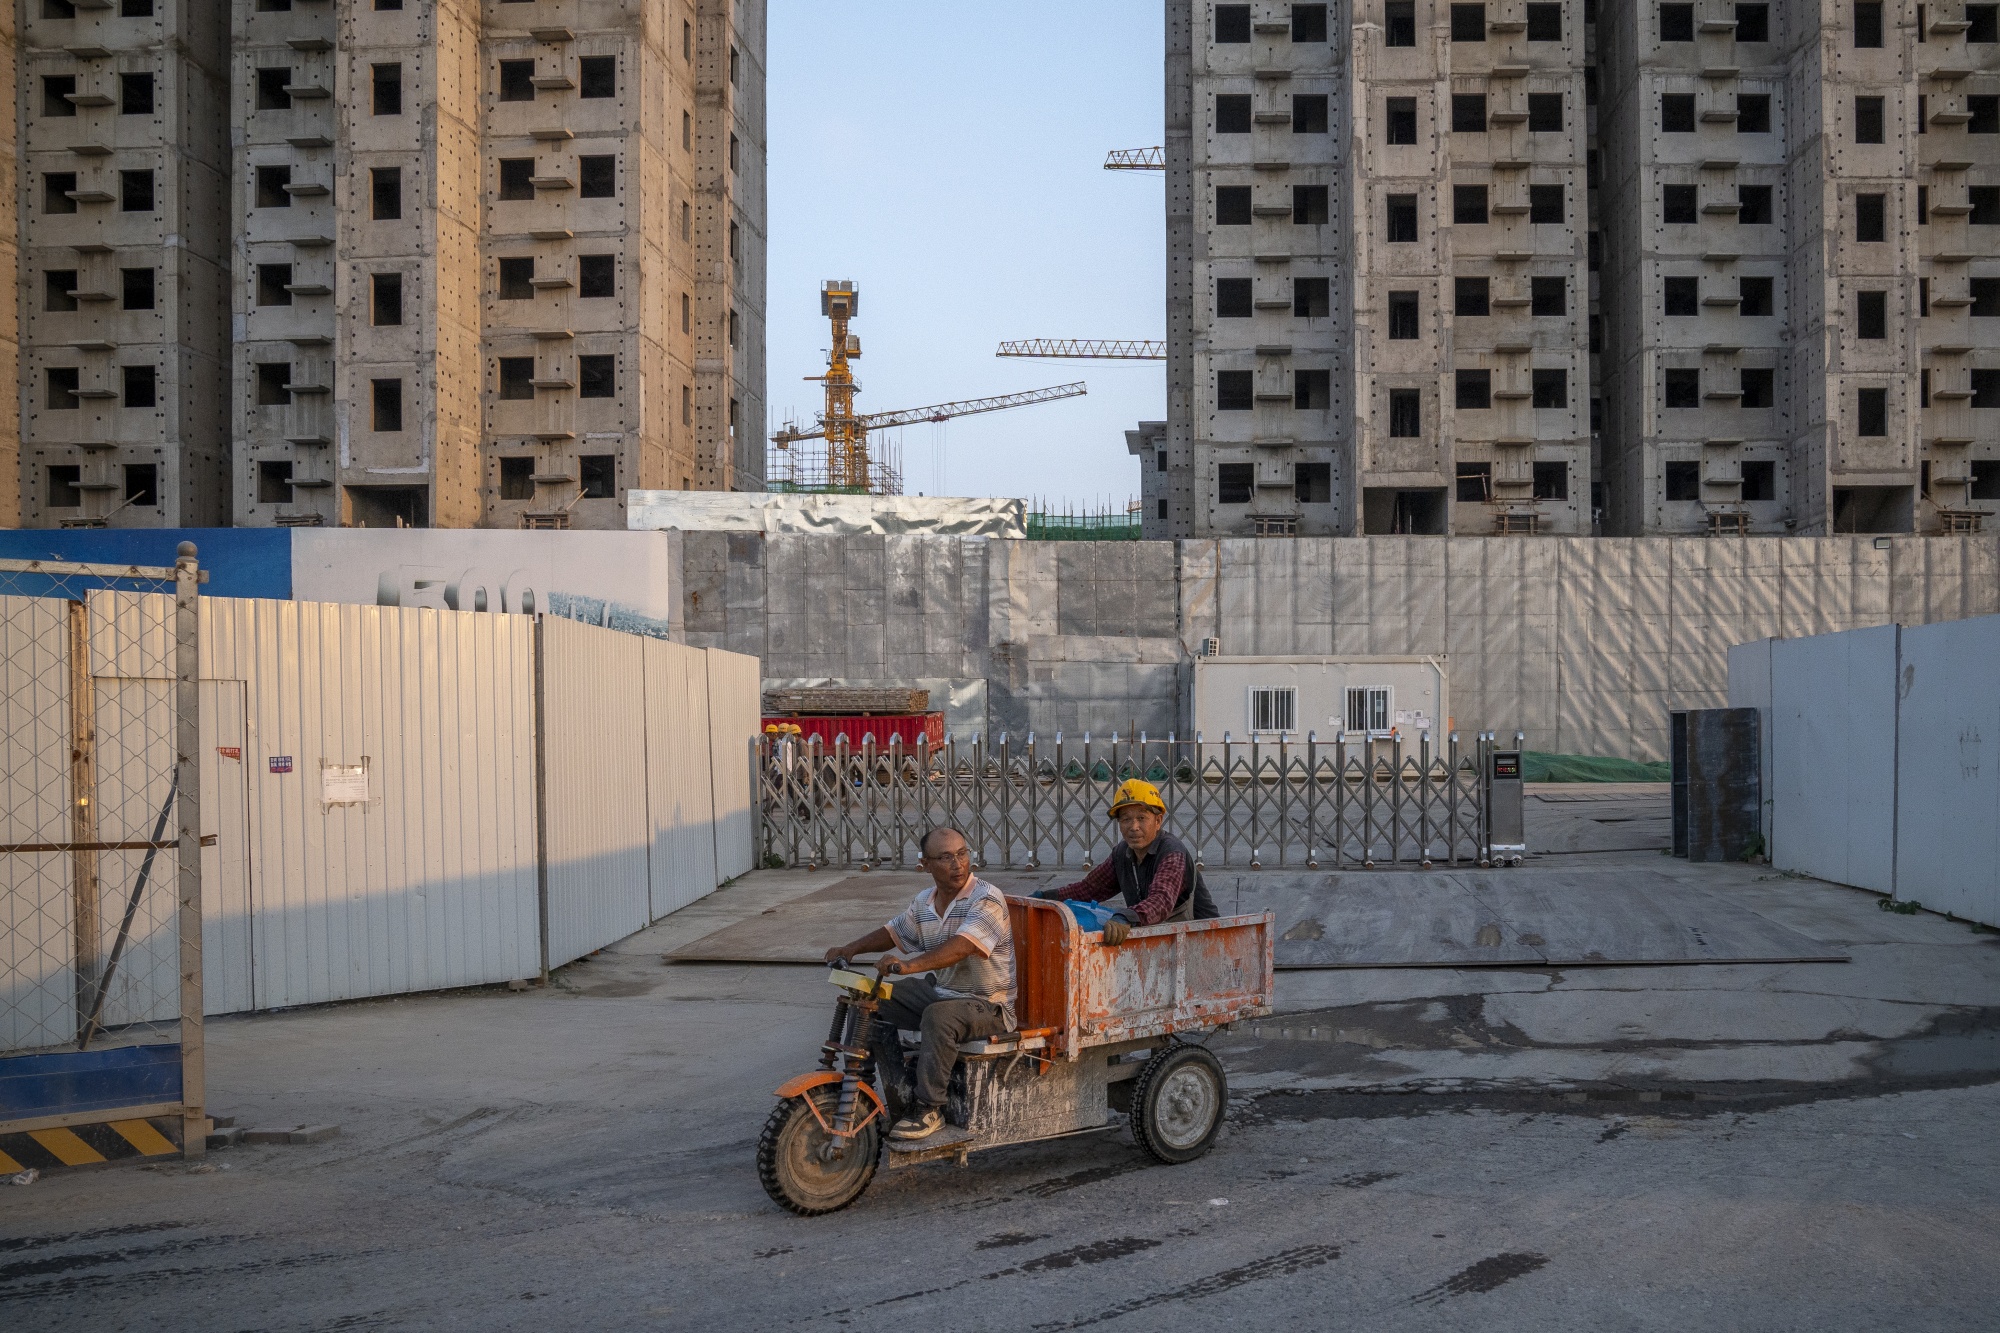 China’s vast real estate sector is going through an unprecedented crisis as Beijing’s deleveraging campaign since late 2020 has ensnared even the nation’s largest developers.